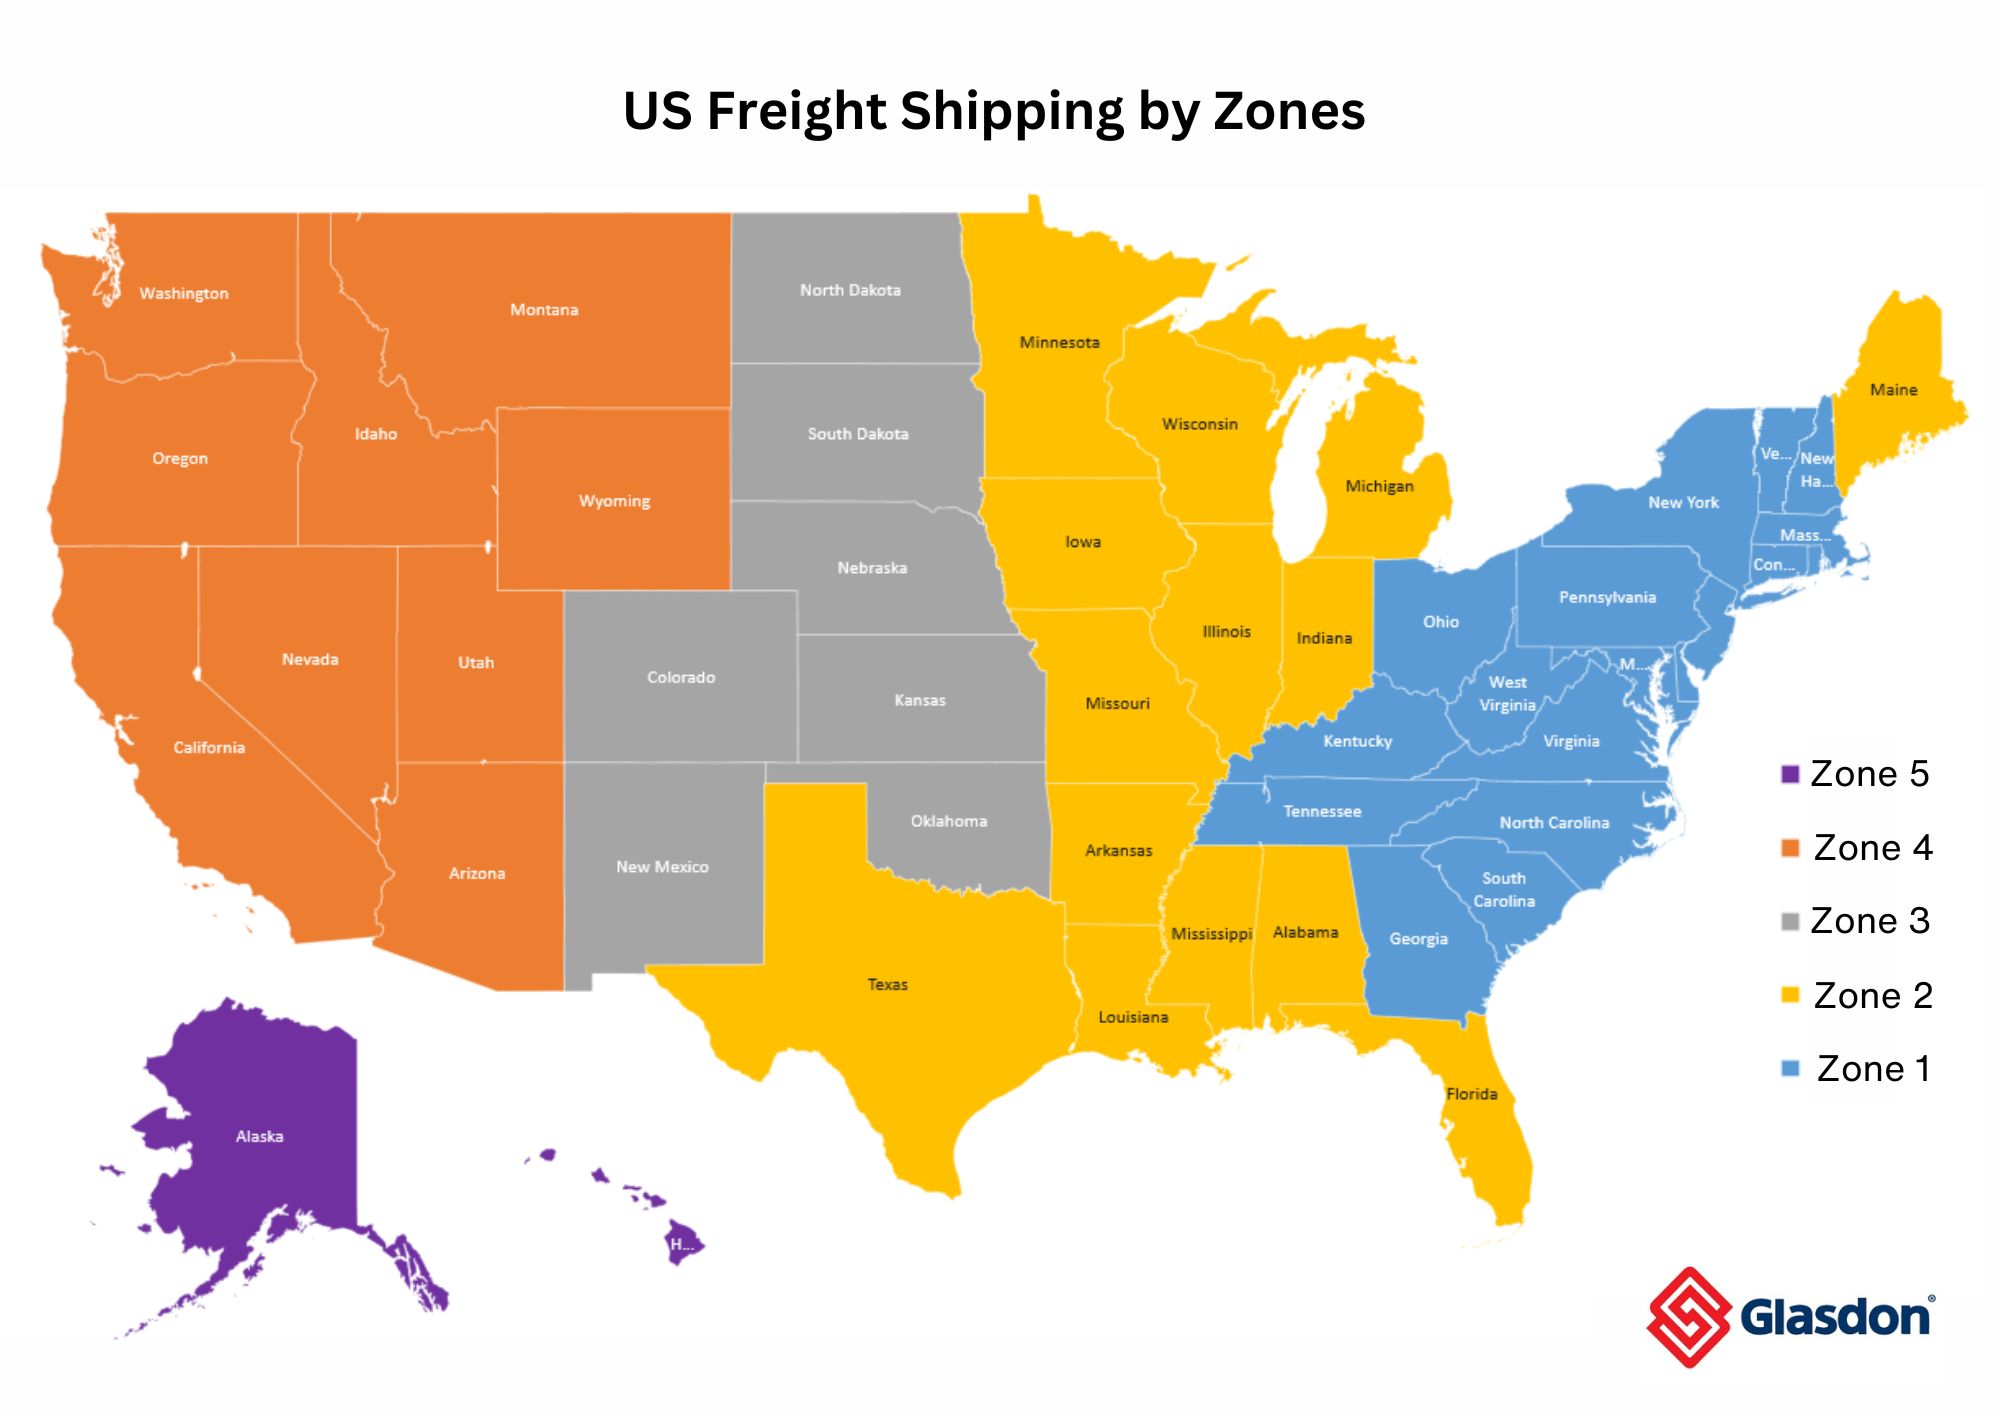 US freight shipping map by zones